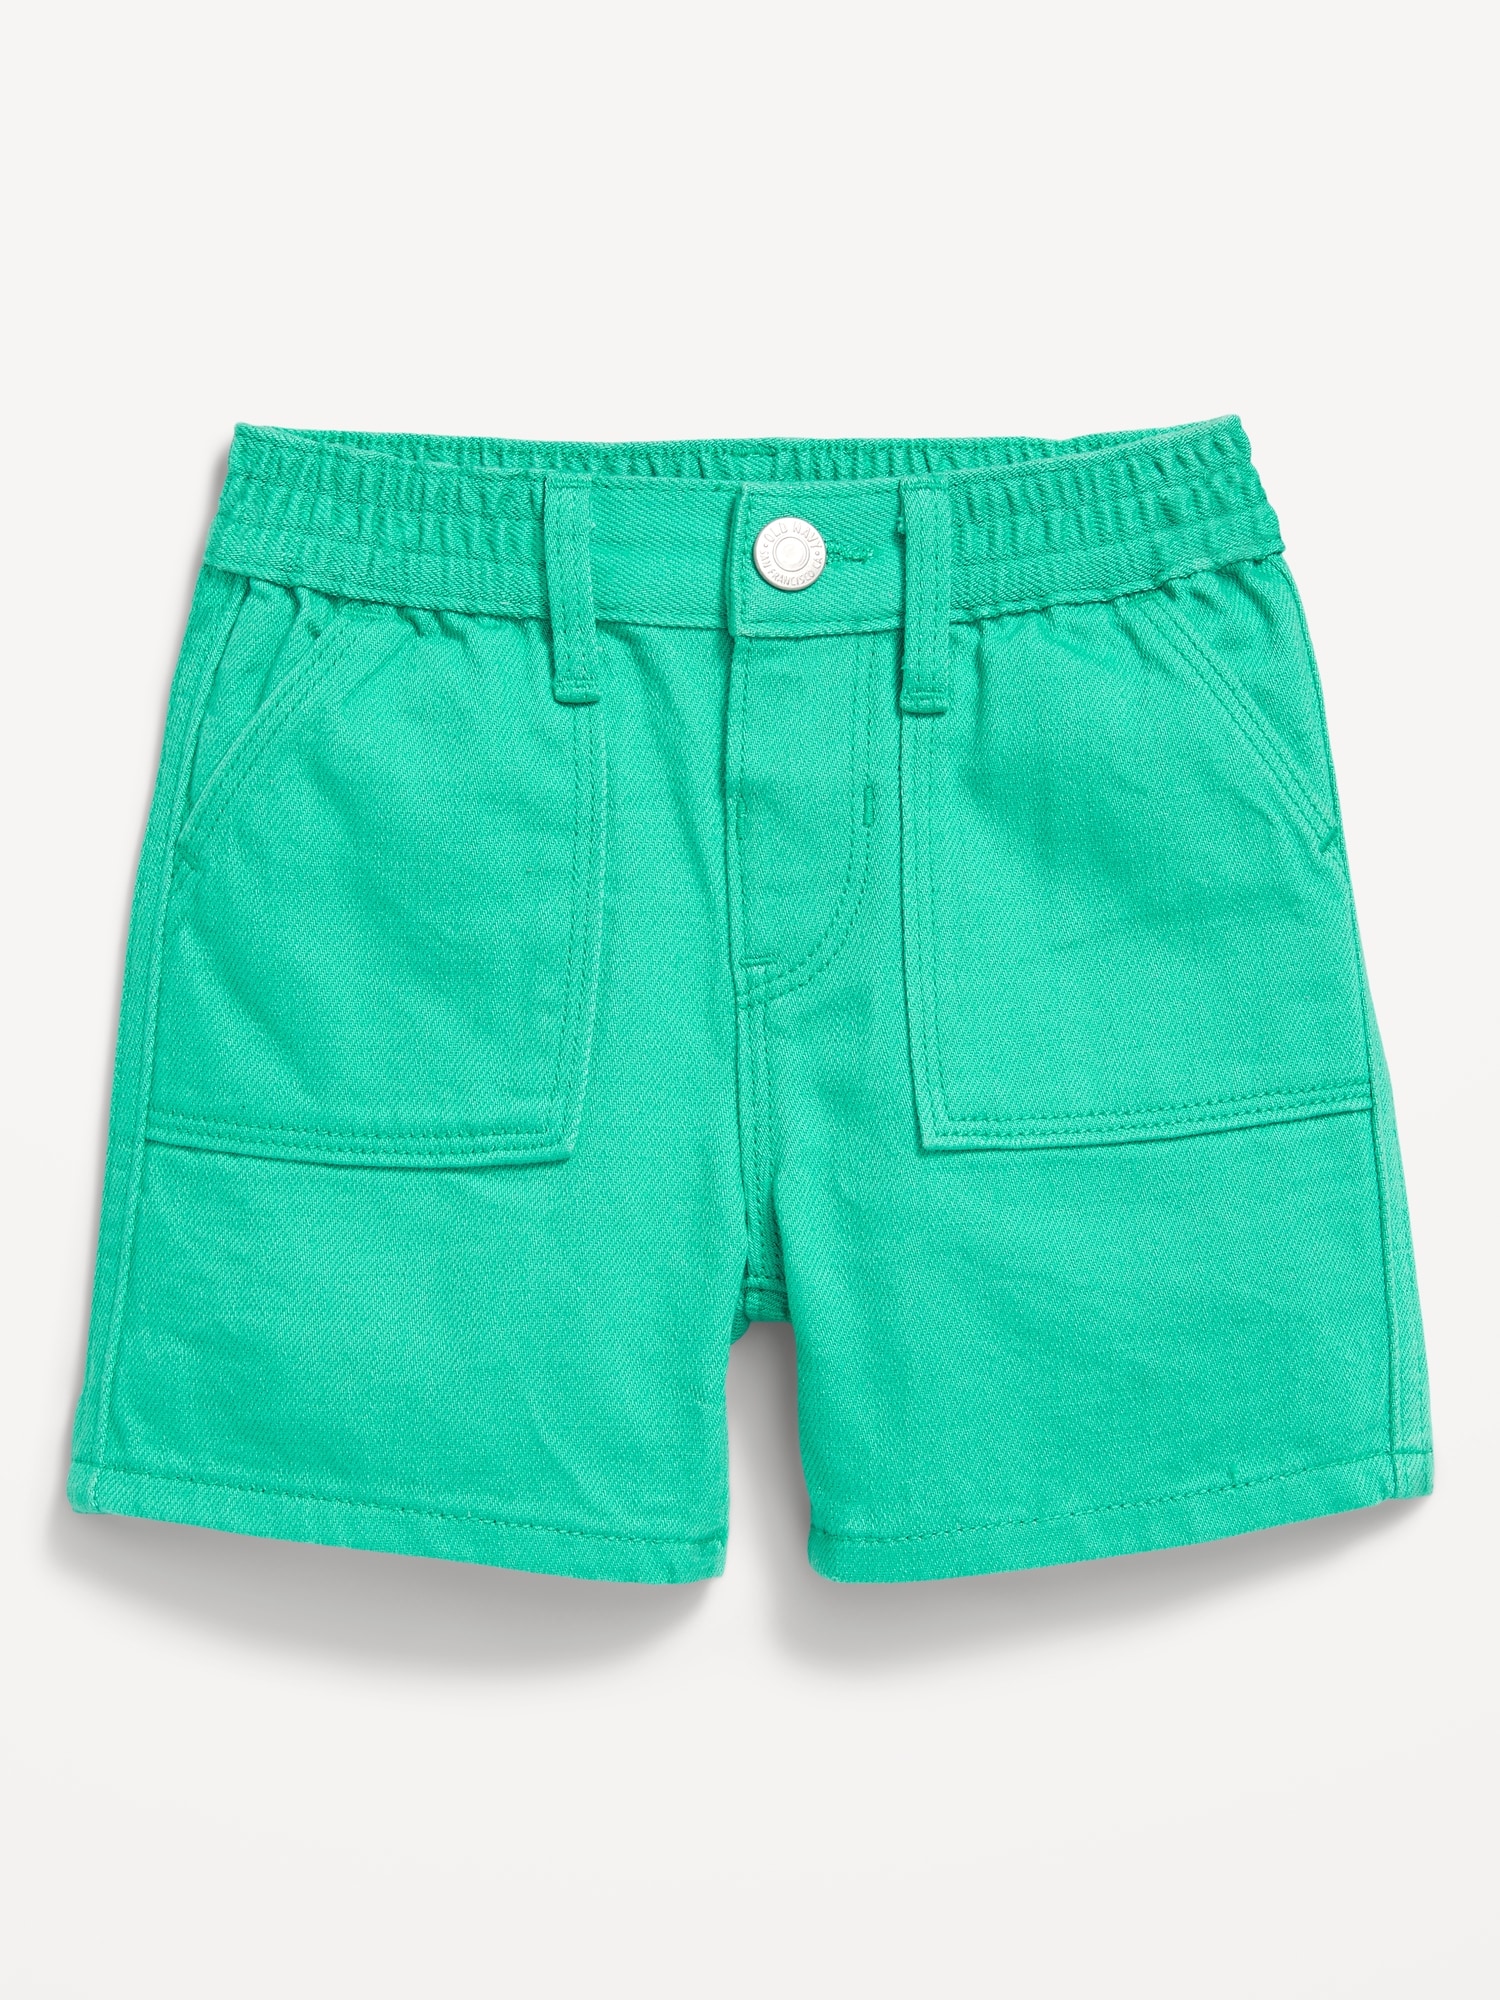 Old Navy Elasticized Waist Workwear Non-Stretch Pop-Color Jean Shorts for Toddler Girls green. 1